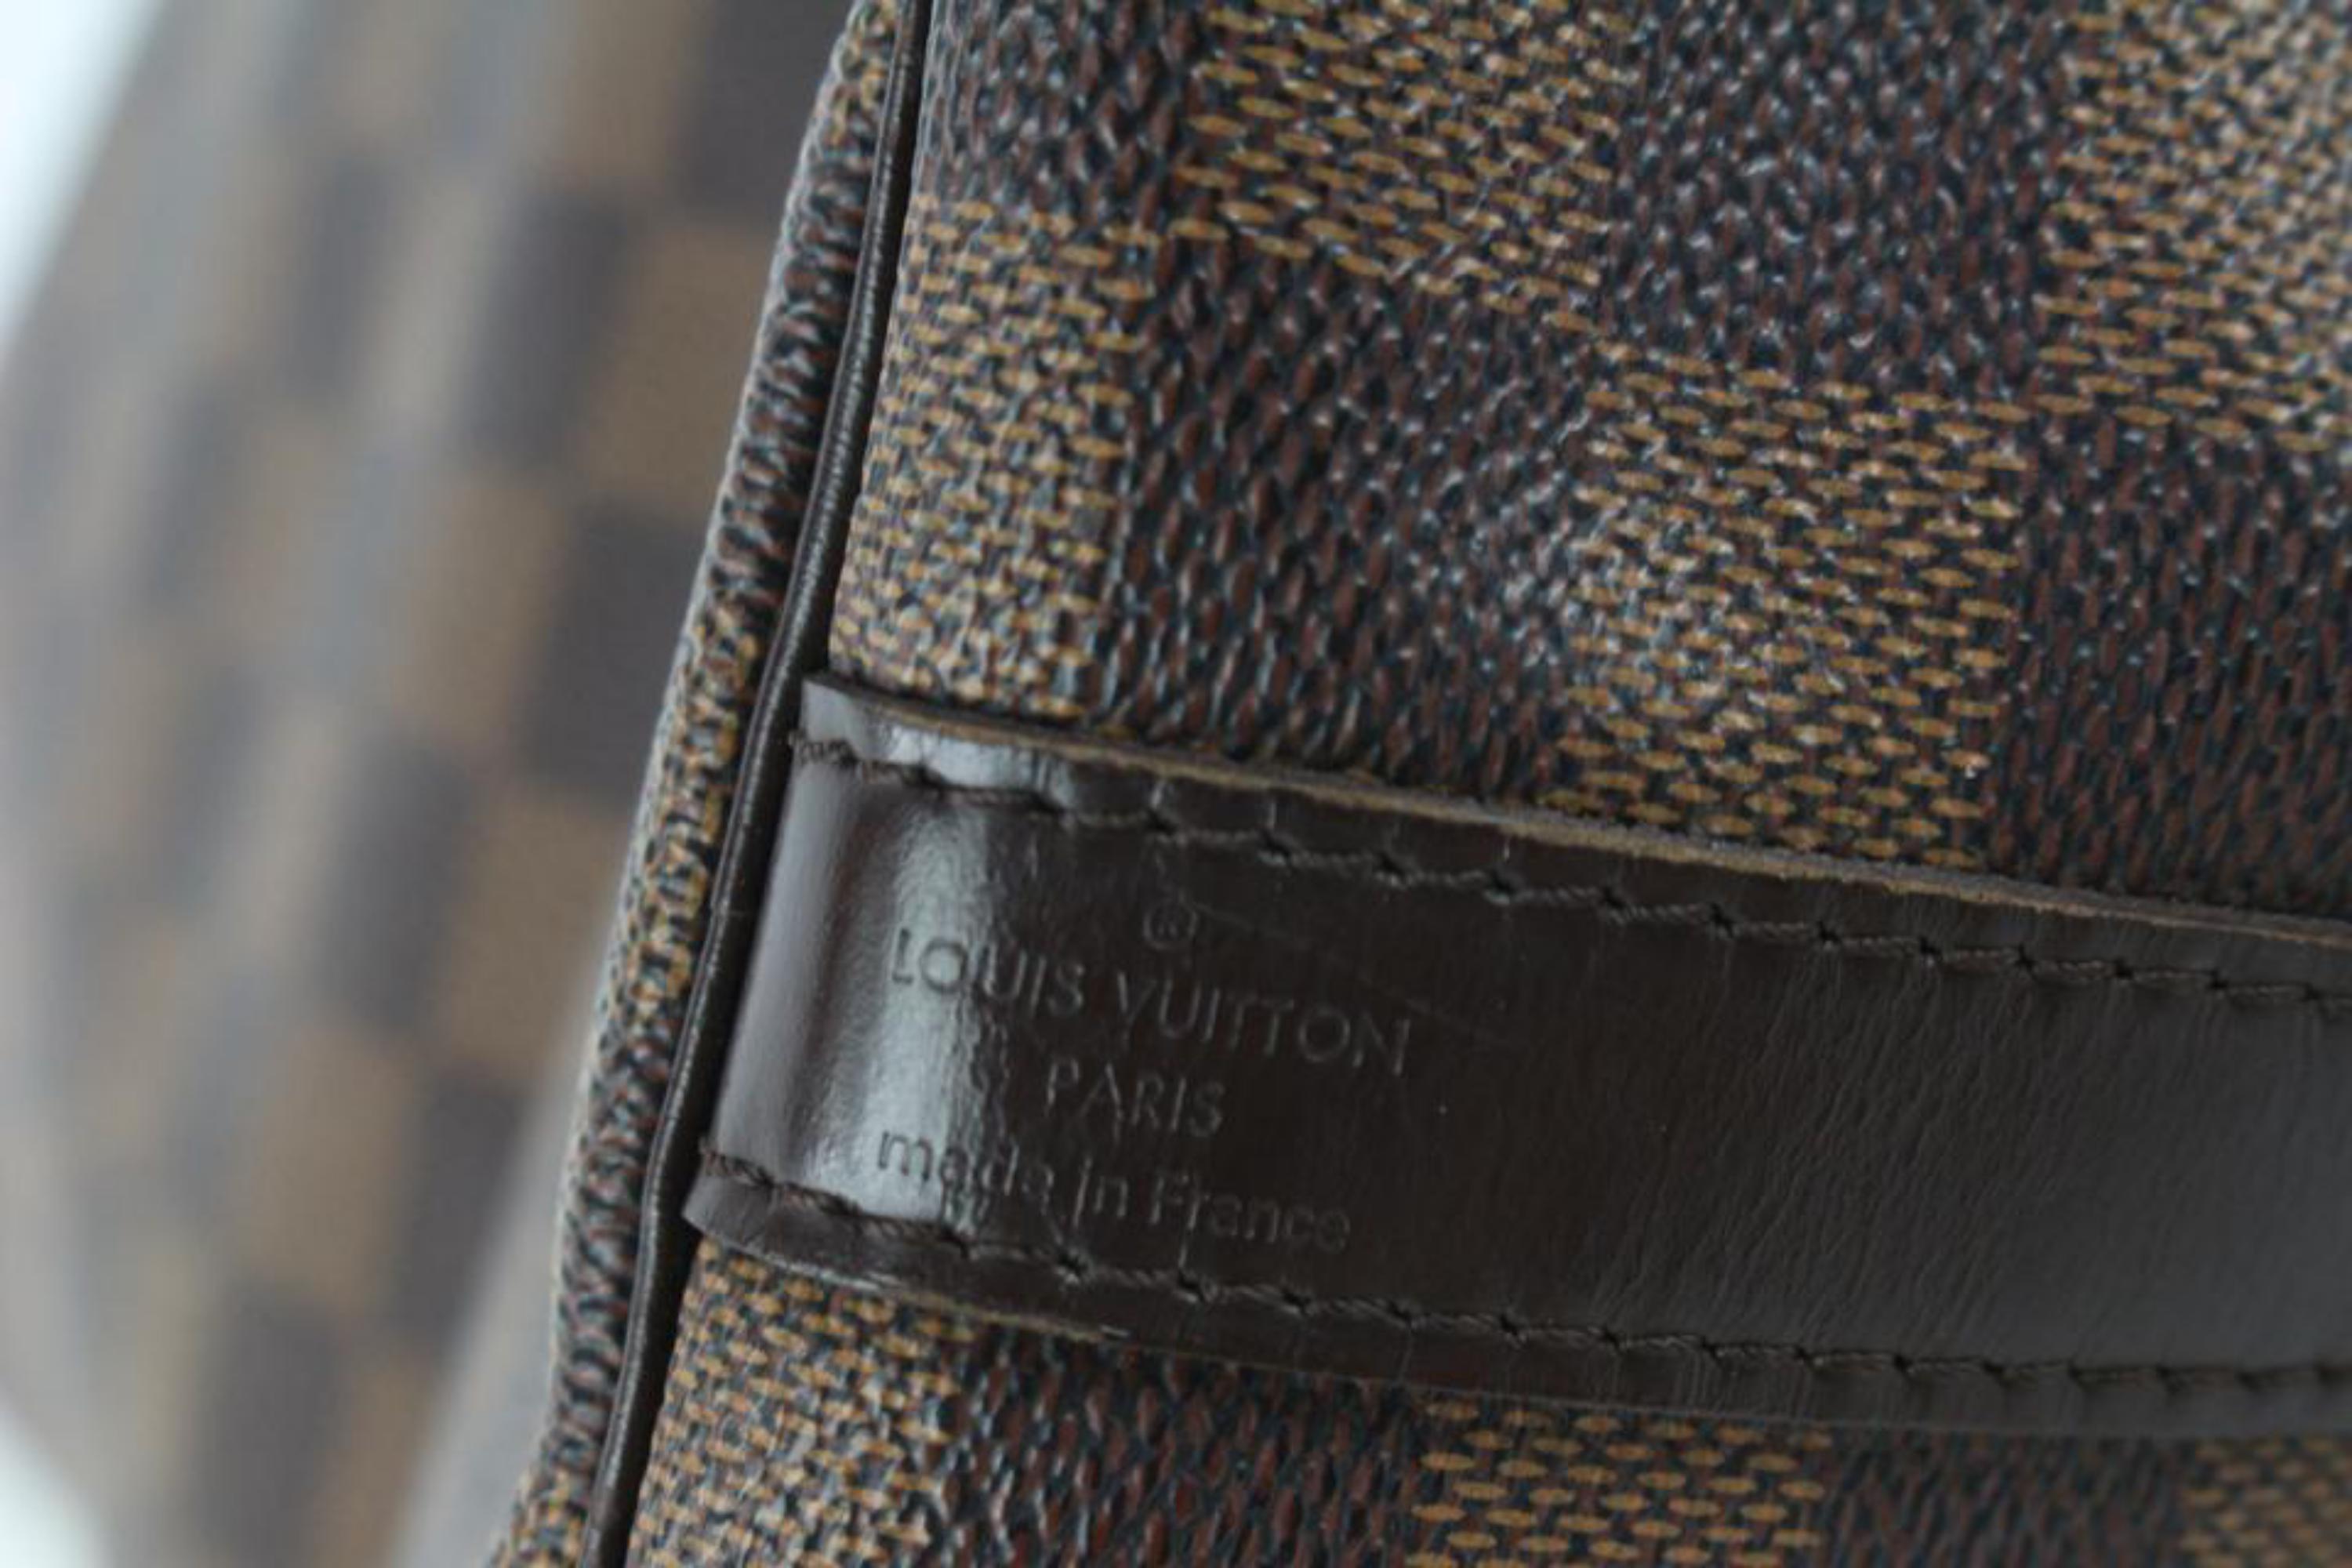 Louis Vuitton Damier Ebene Speedy Bandouliere 35 with Strap 112lv21 For Sale 3